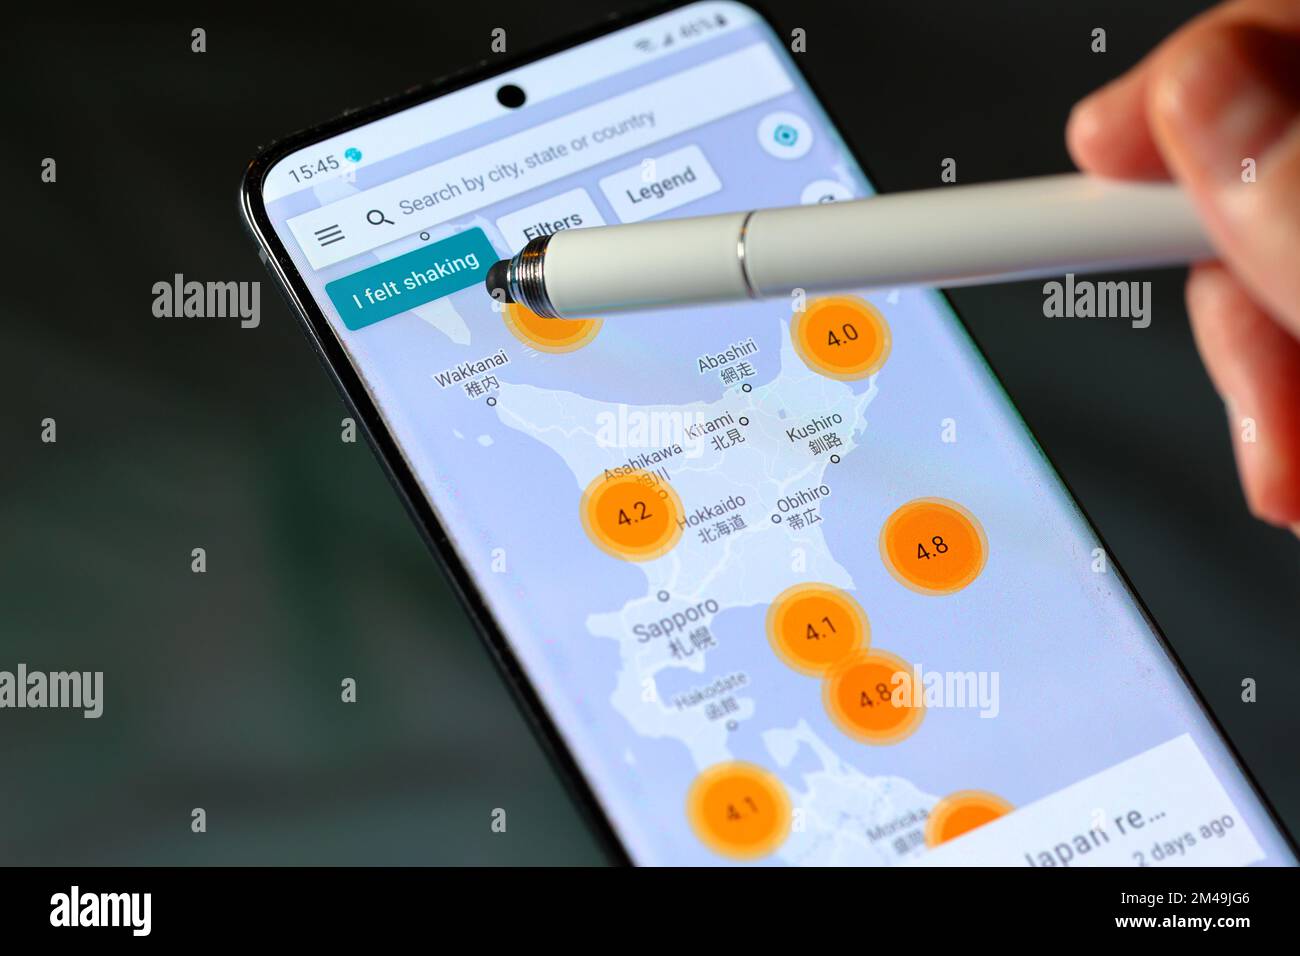 A stylus points to the 'I felt shaking' button on the MyShake earthquake app by UC Berkeley Seismological Lab. Stock Photo